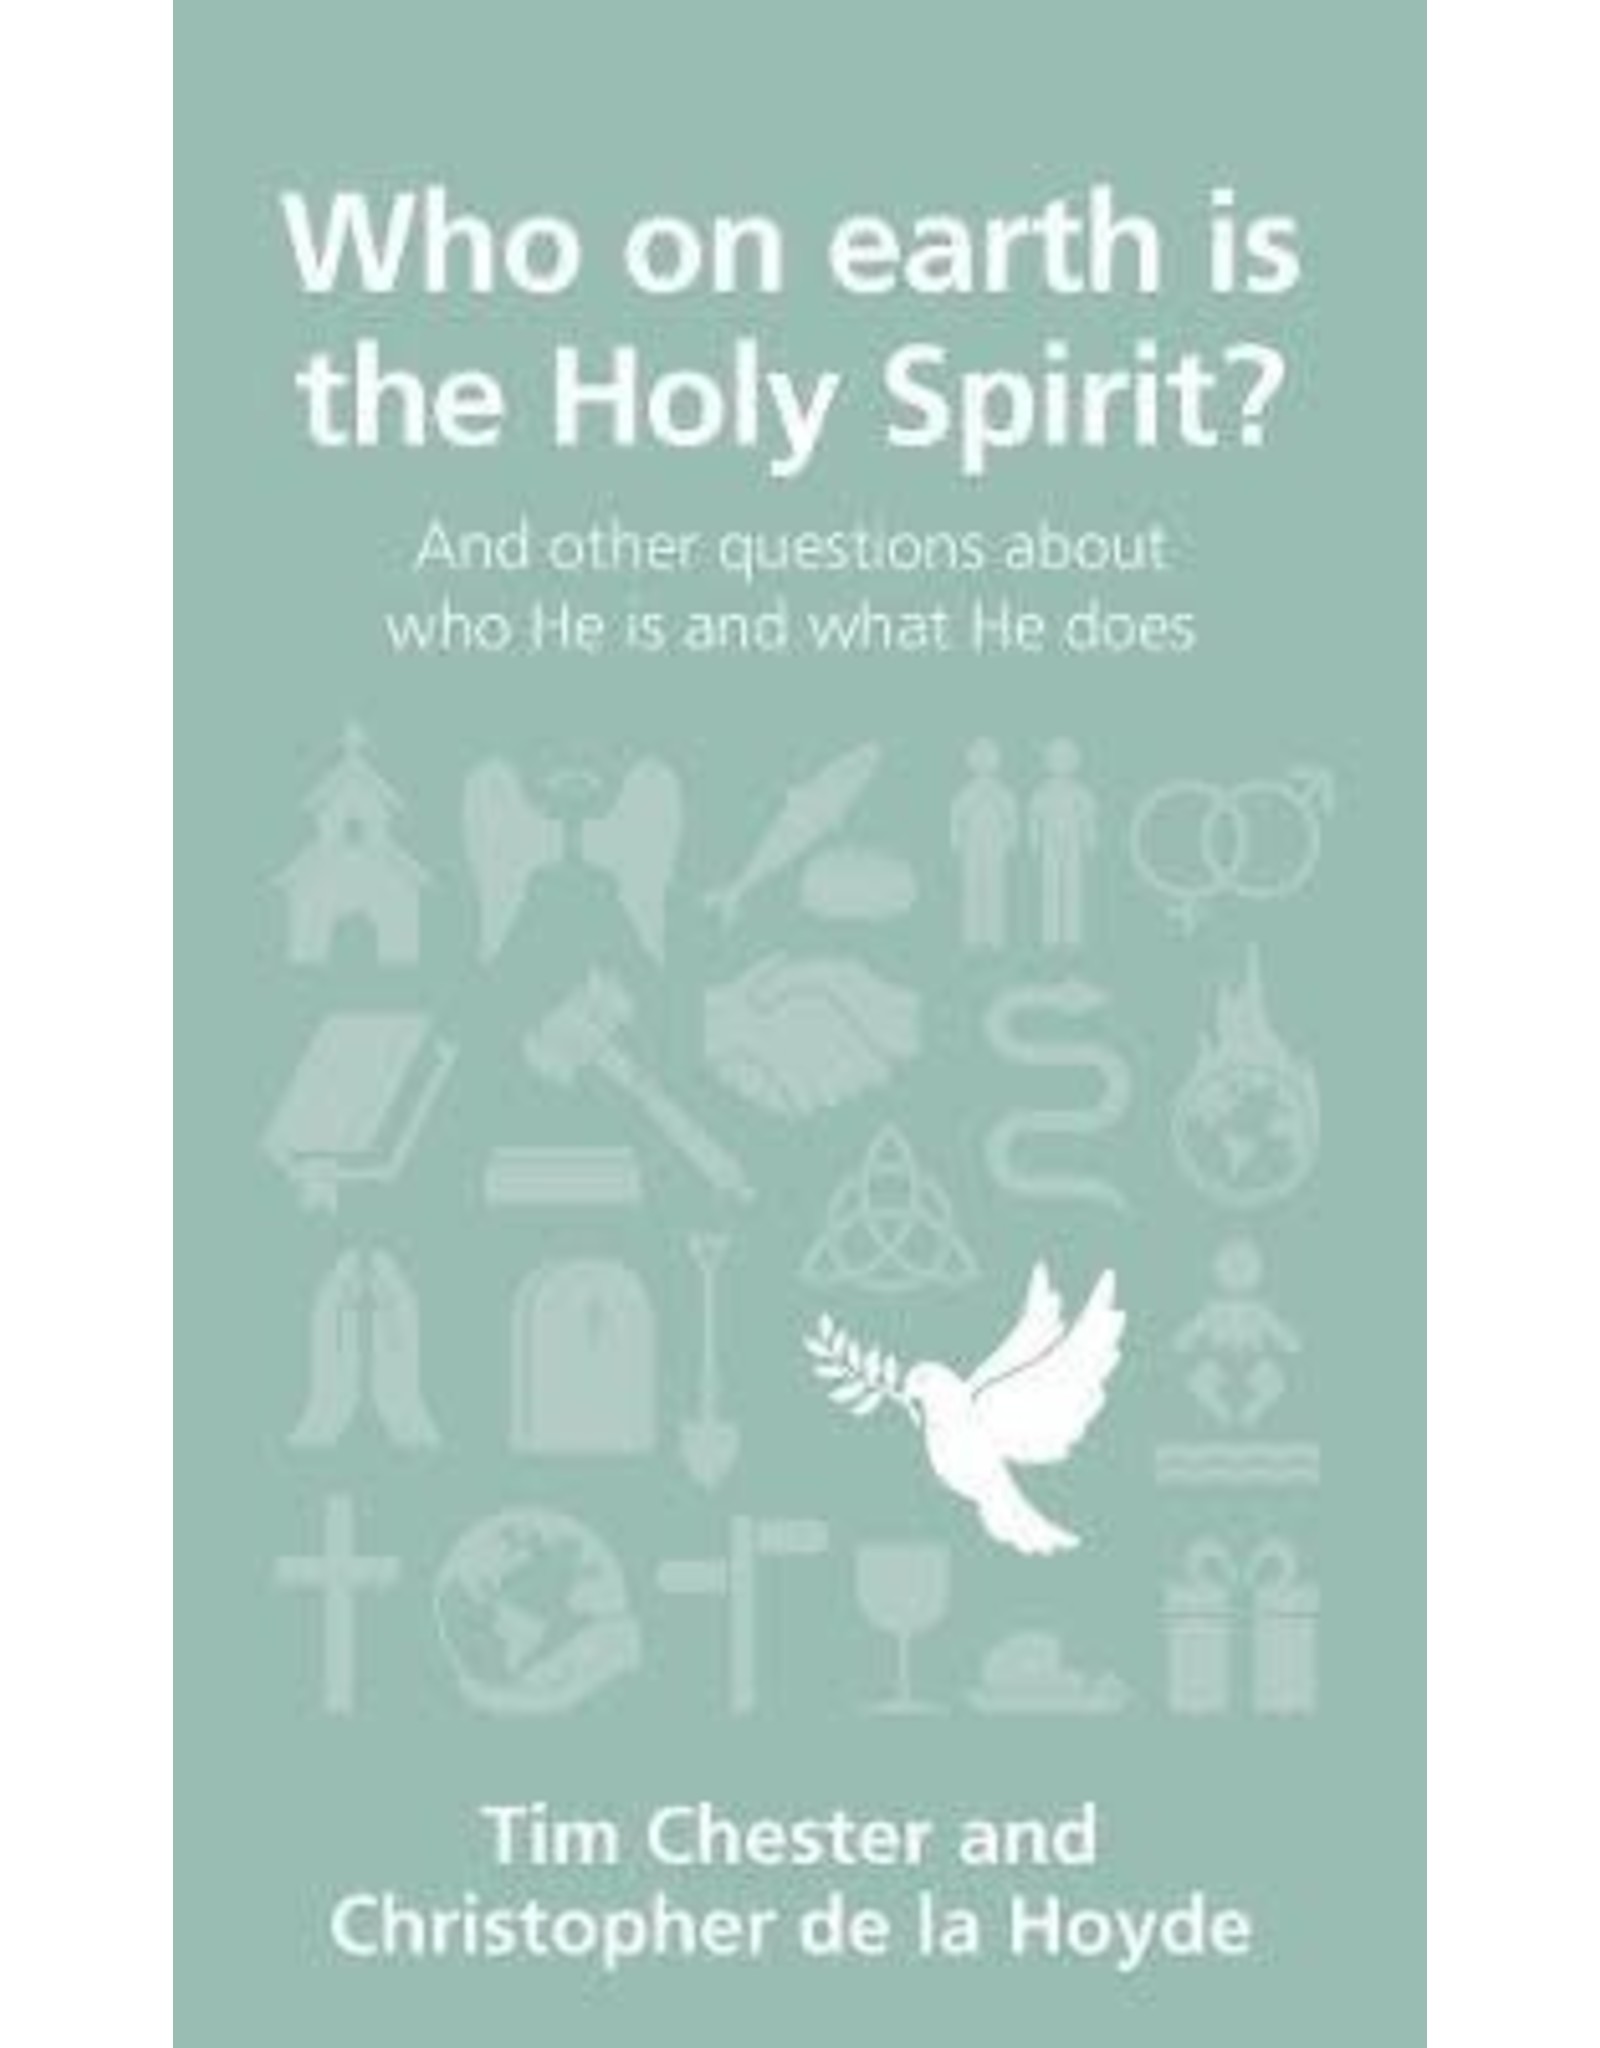 Tim Chester & Christopher De la Hoyde Who on Earth is the Holy Spirit?